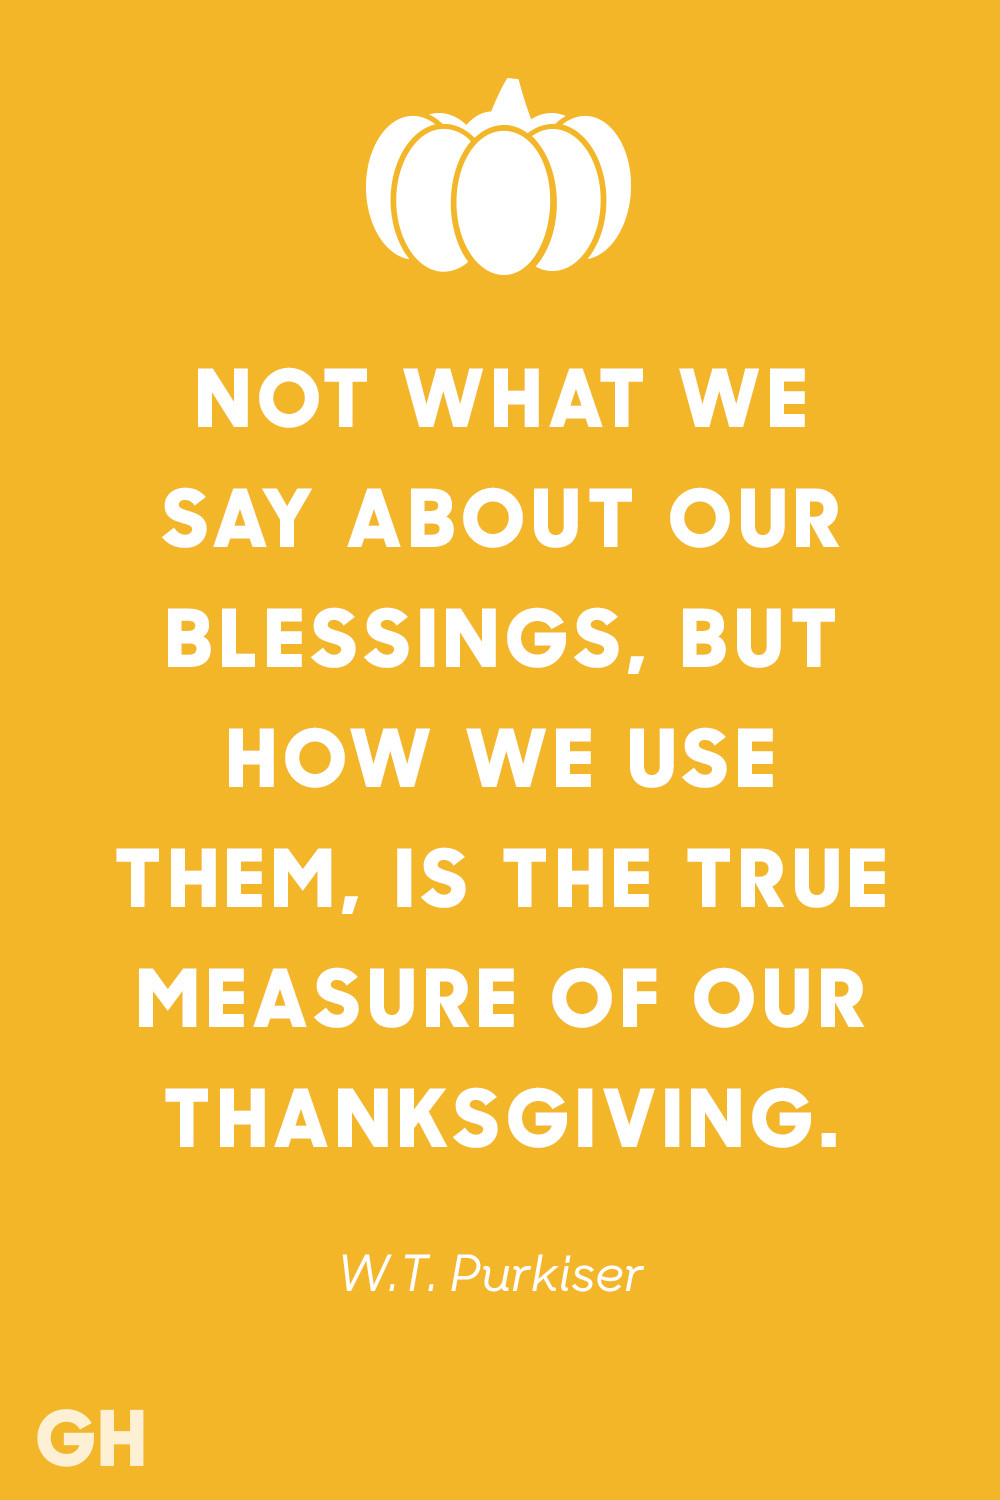 Thanksgiving Thankful Quote
 15 Best Thanksgiving Quotes Inspirational and Funny